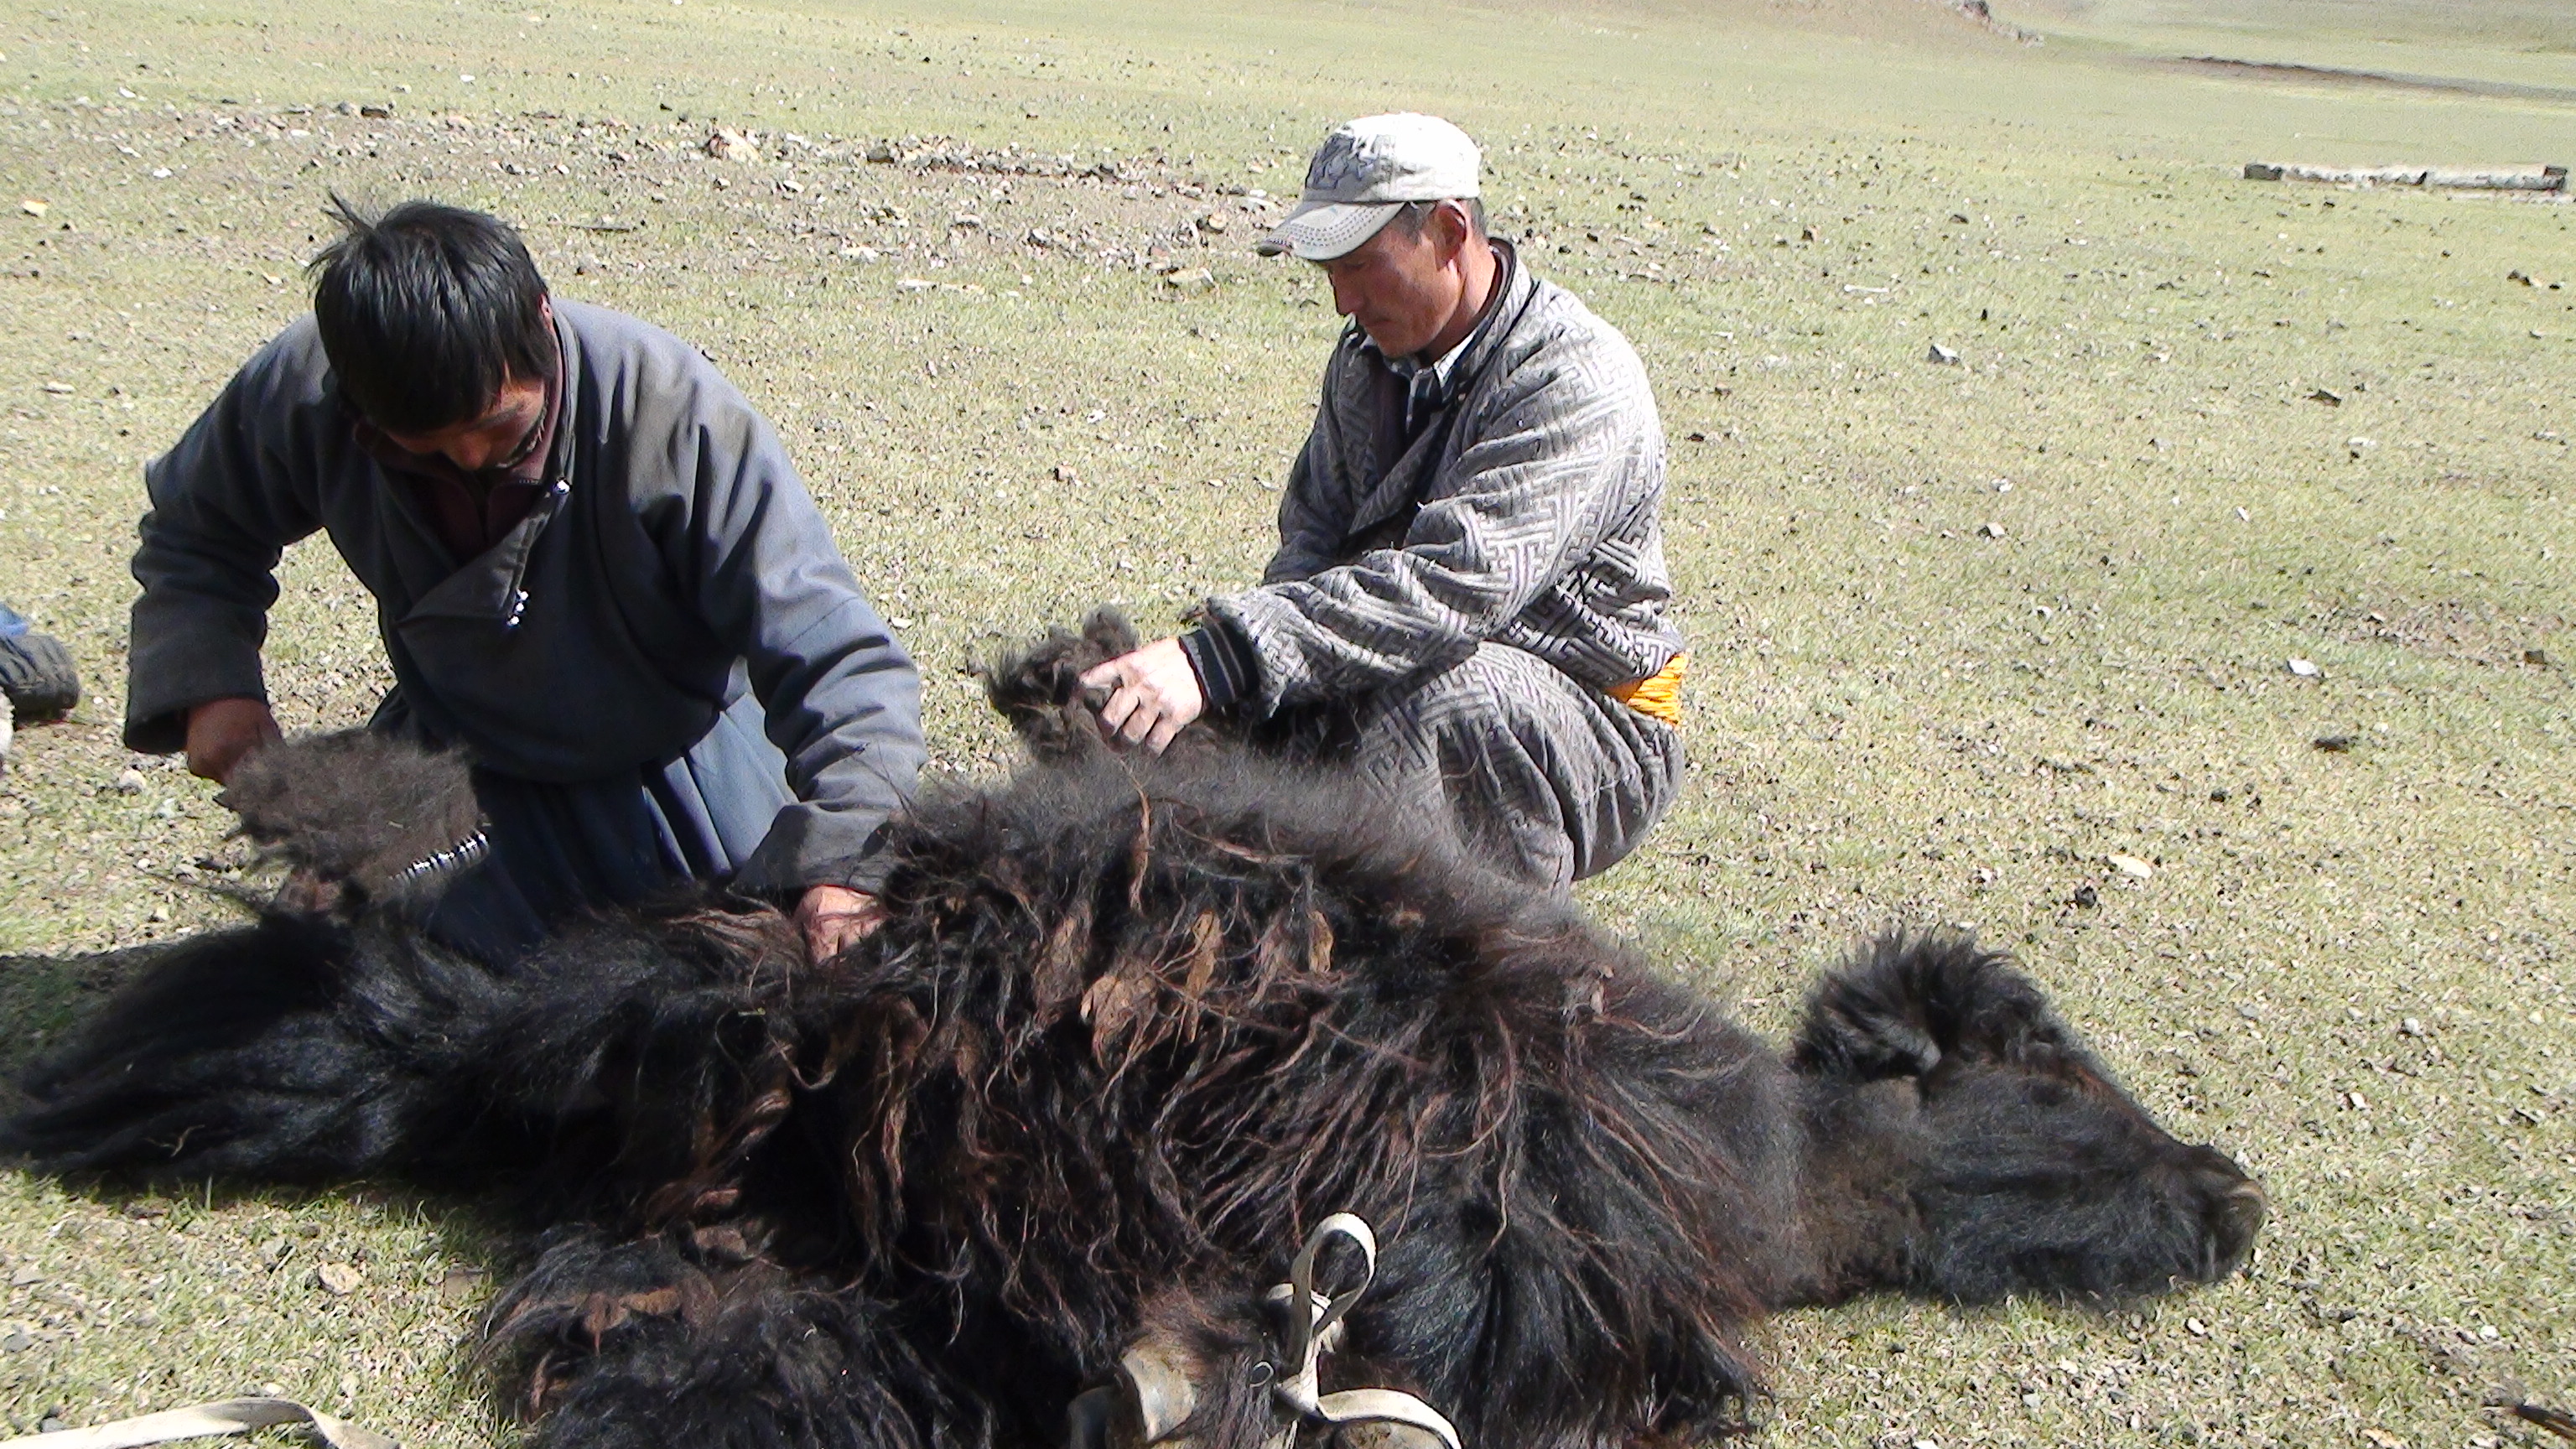 Two men shearing a yak strapped to the ground.